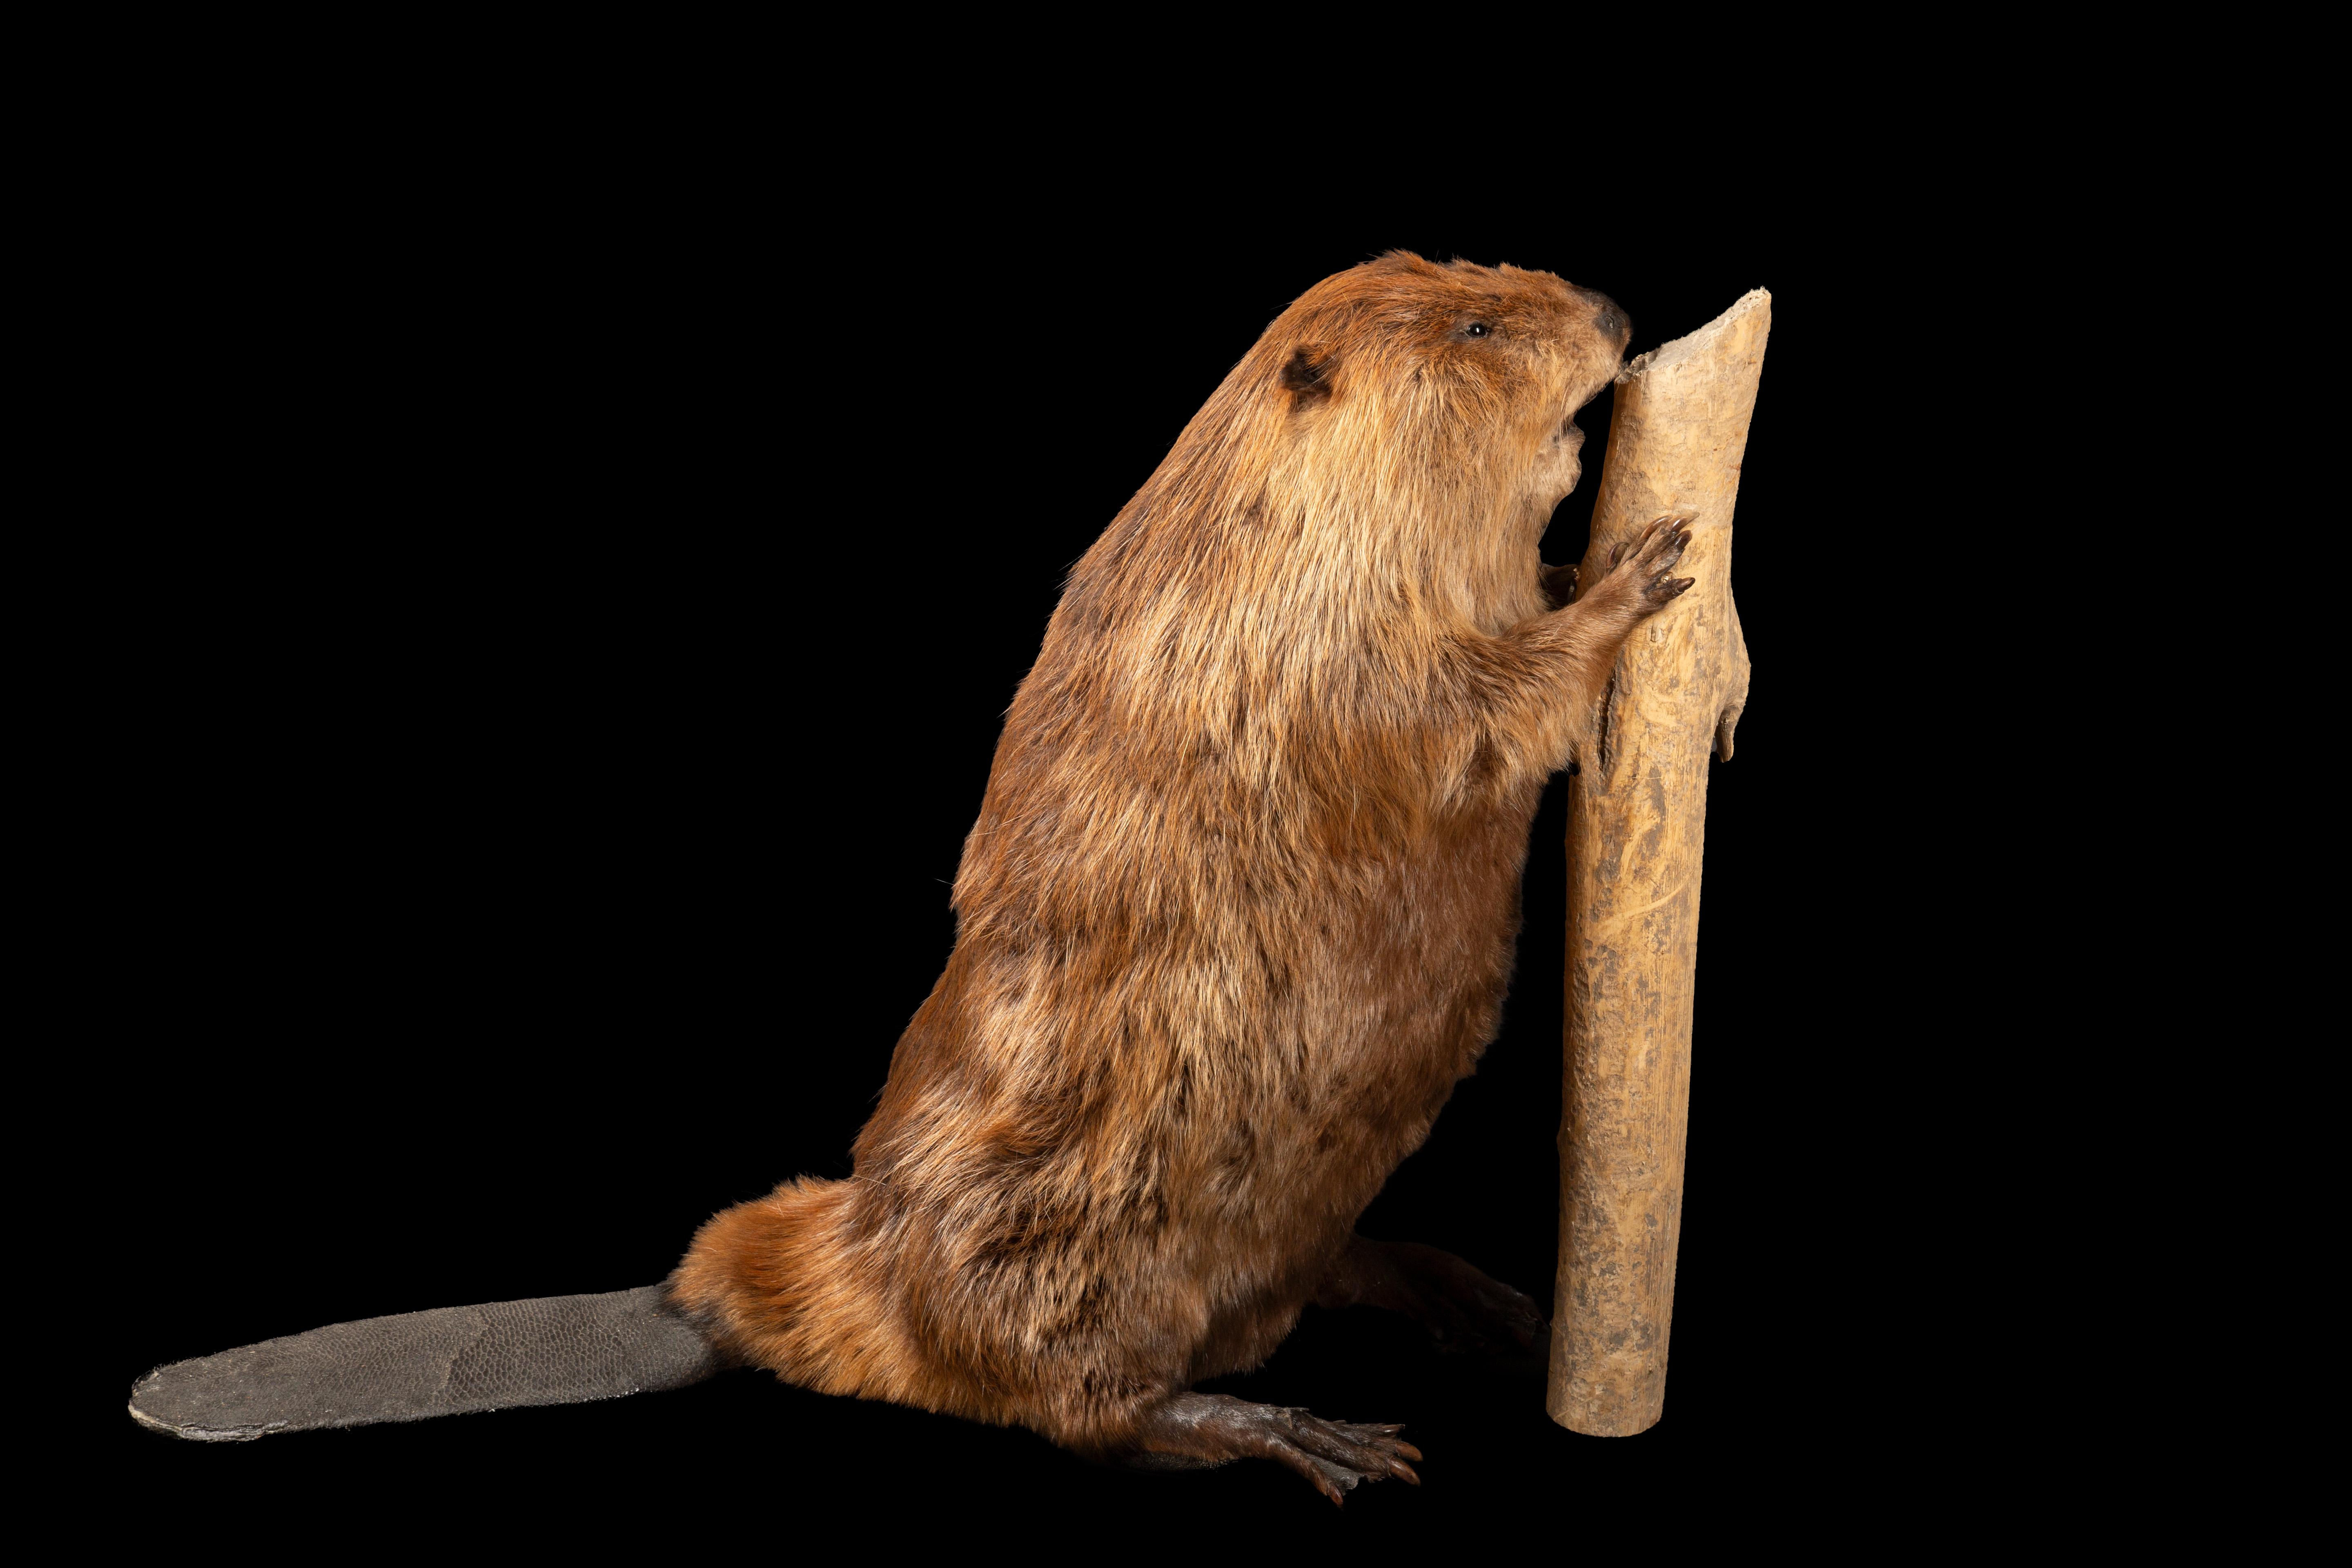 Meticulously crafted North American beaver taxidermy display, showcasing this iconic mammal in a lifelike and engaging pose. Our skilled taxidermists have expertly captured the essence of a North American beaver in its natural habitat, depicted